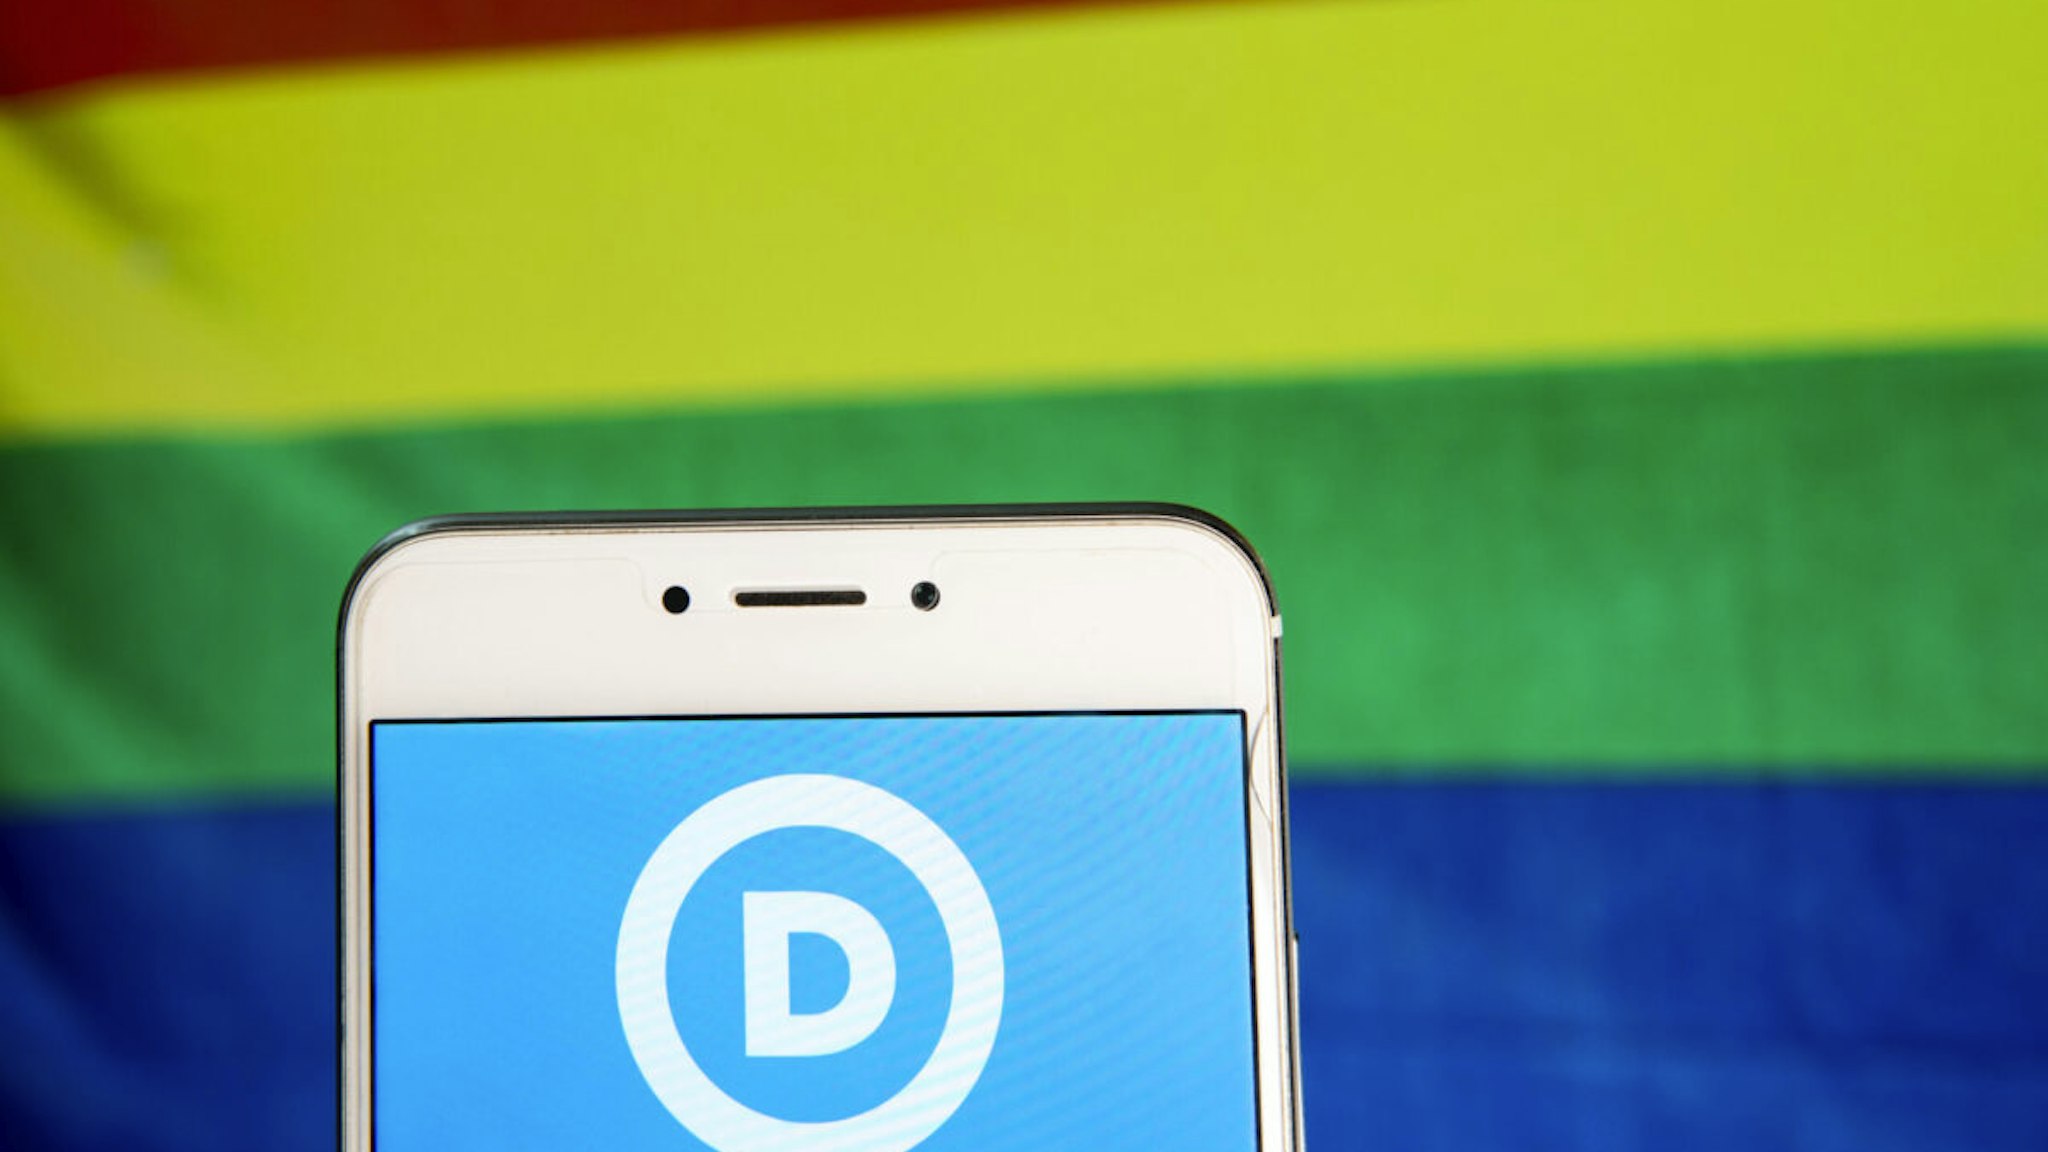 In this photo illustration, the American liberal, progressive and left-wing democratic Party icon is seen displayed on an Android mobile device with a LGTB rainbow in the background